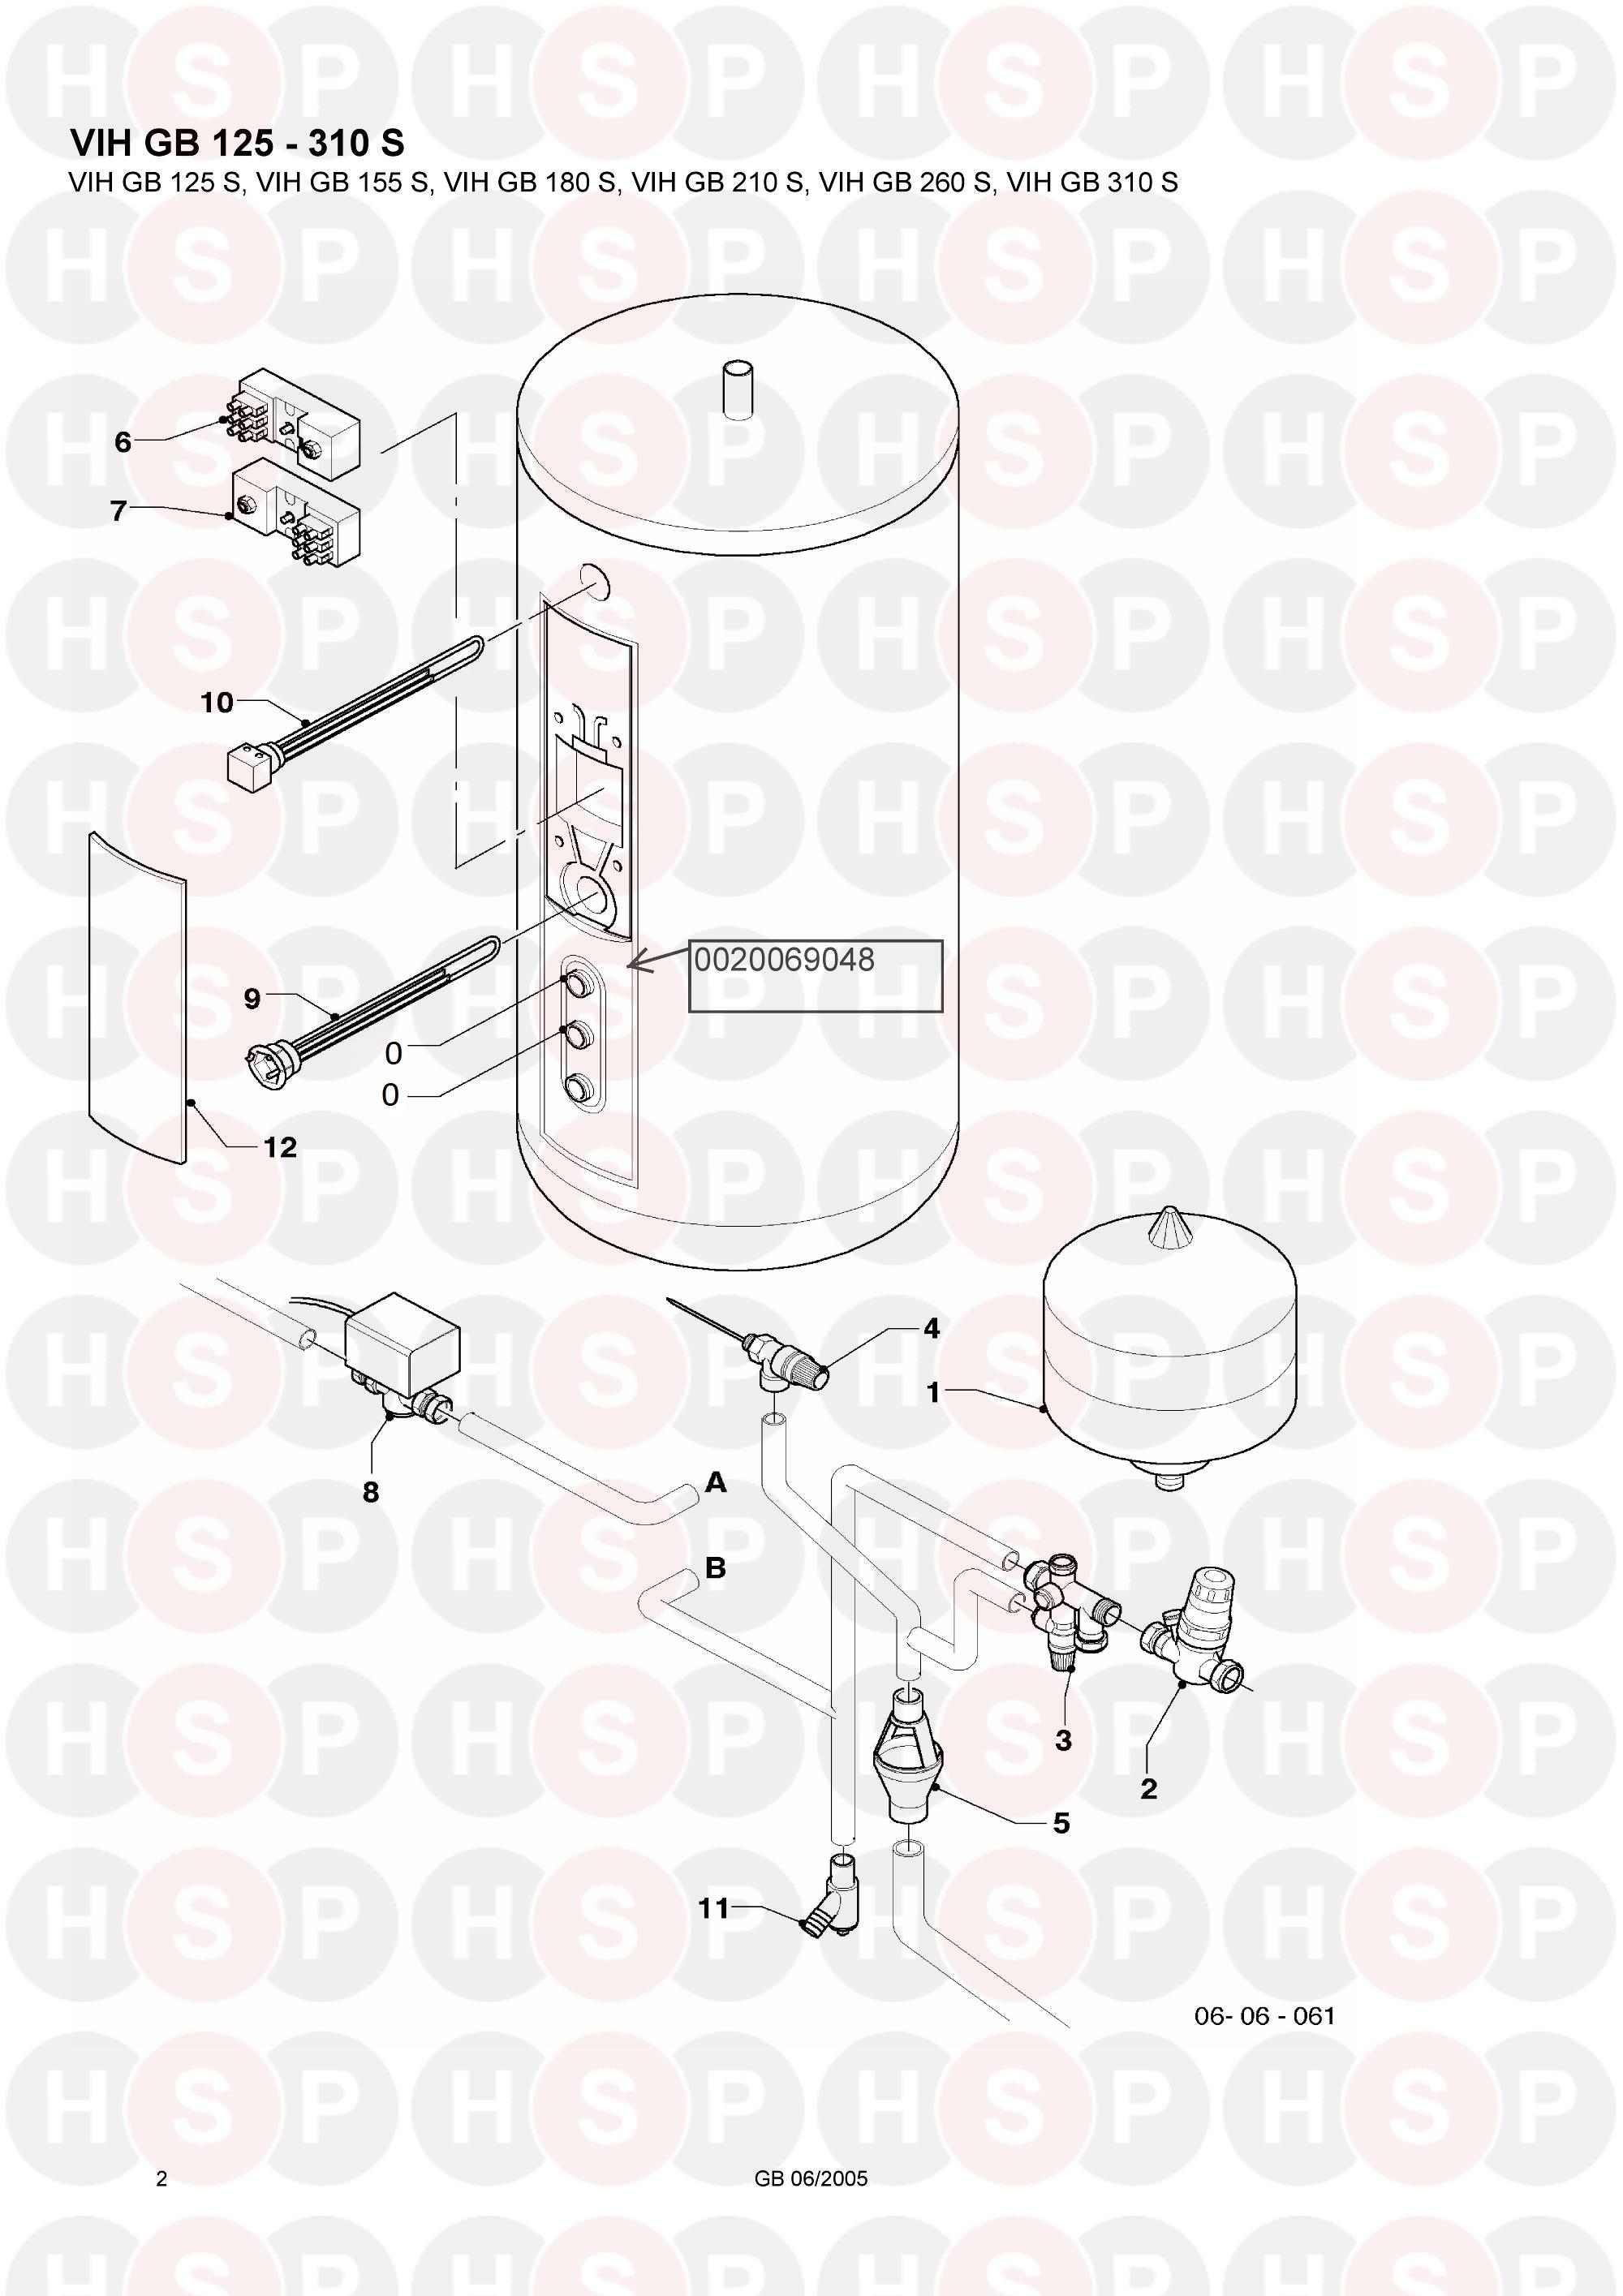 Exploded View Storage Water Heater diagram for Vaillant Unistor VIH GB 180 S